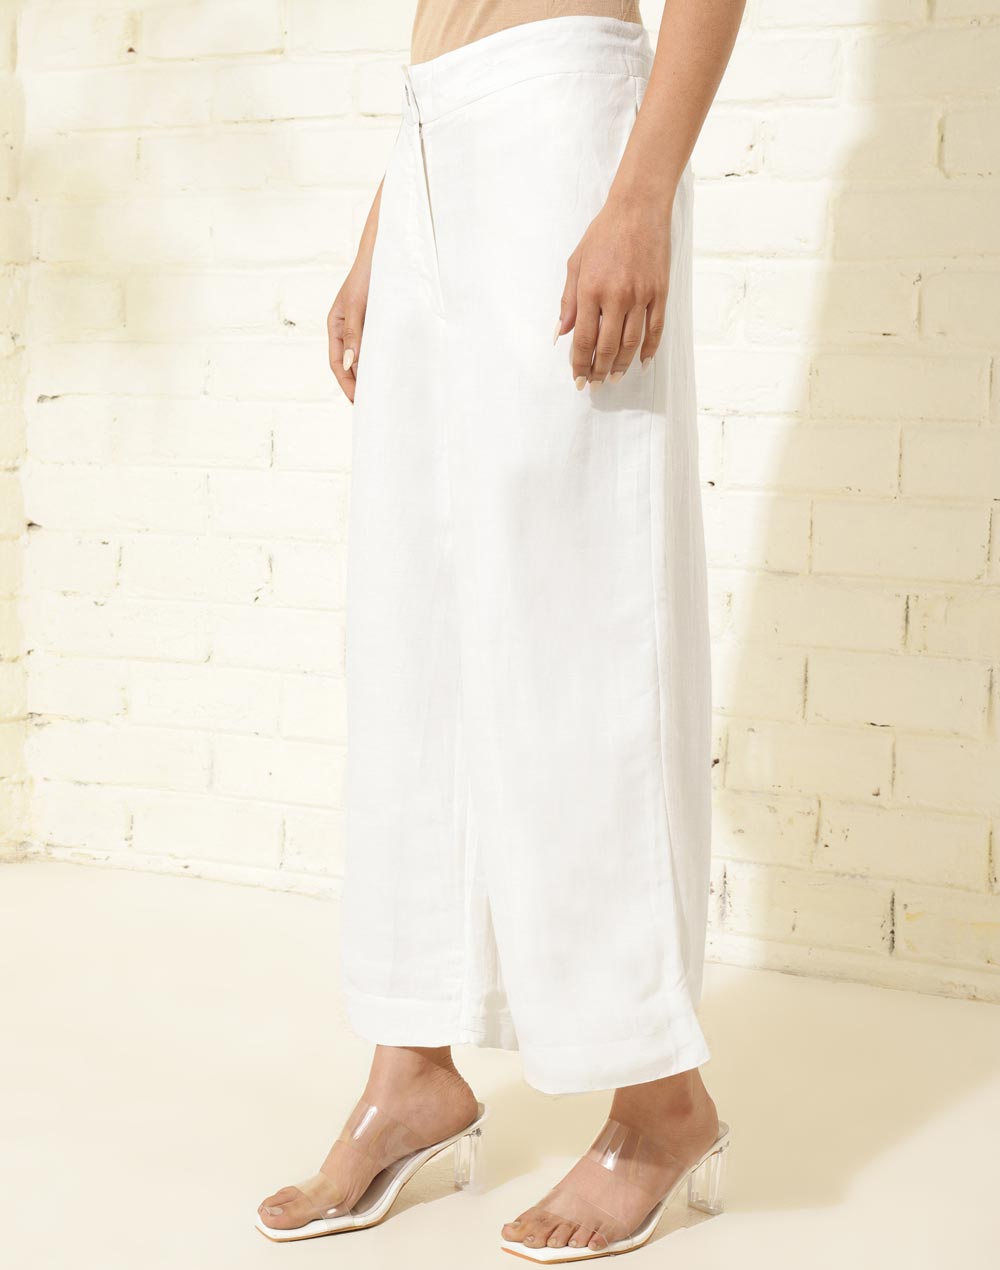 Cotton Lycra Plain Formal Casual Trouser Pant Women at Rs 425/piece in Noida